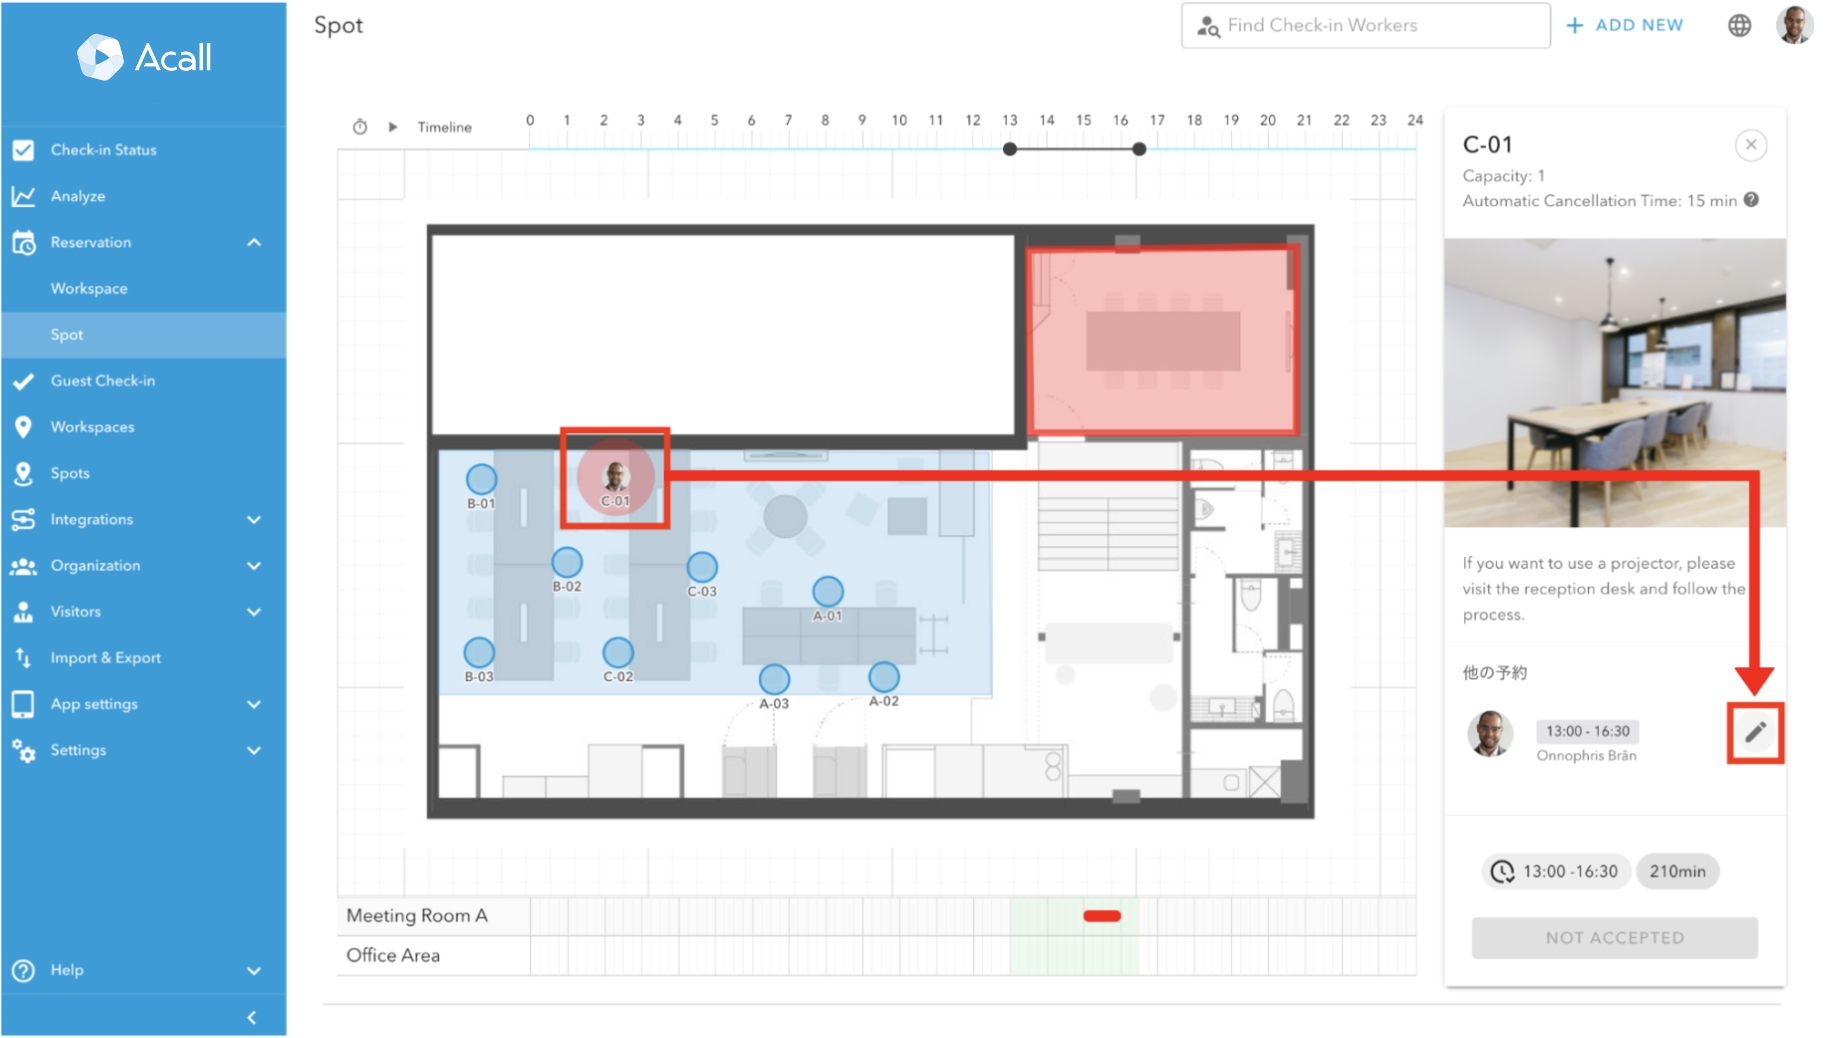 Reserve Your Spot on Floor Map on Acall Portal14.png